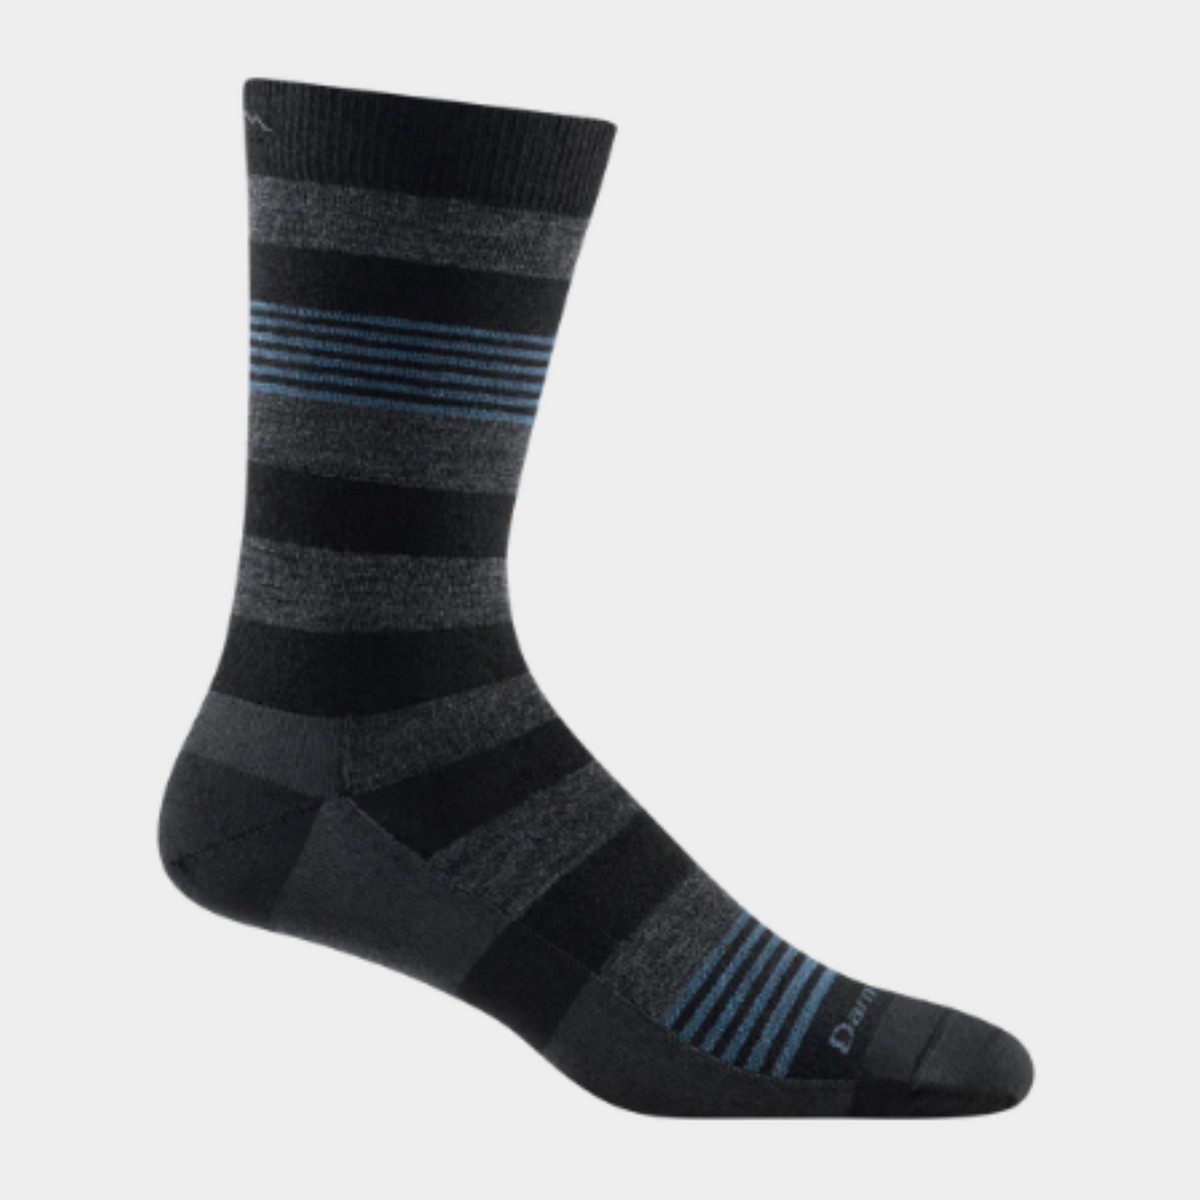 Darn Tough 6033 Oxford Crew Lightweight men&#39;s sock in black featuring black and charcoal gray stripes